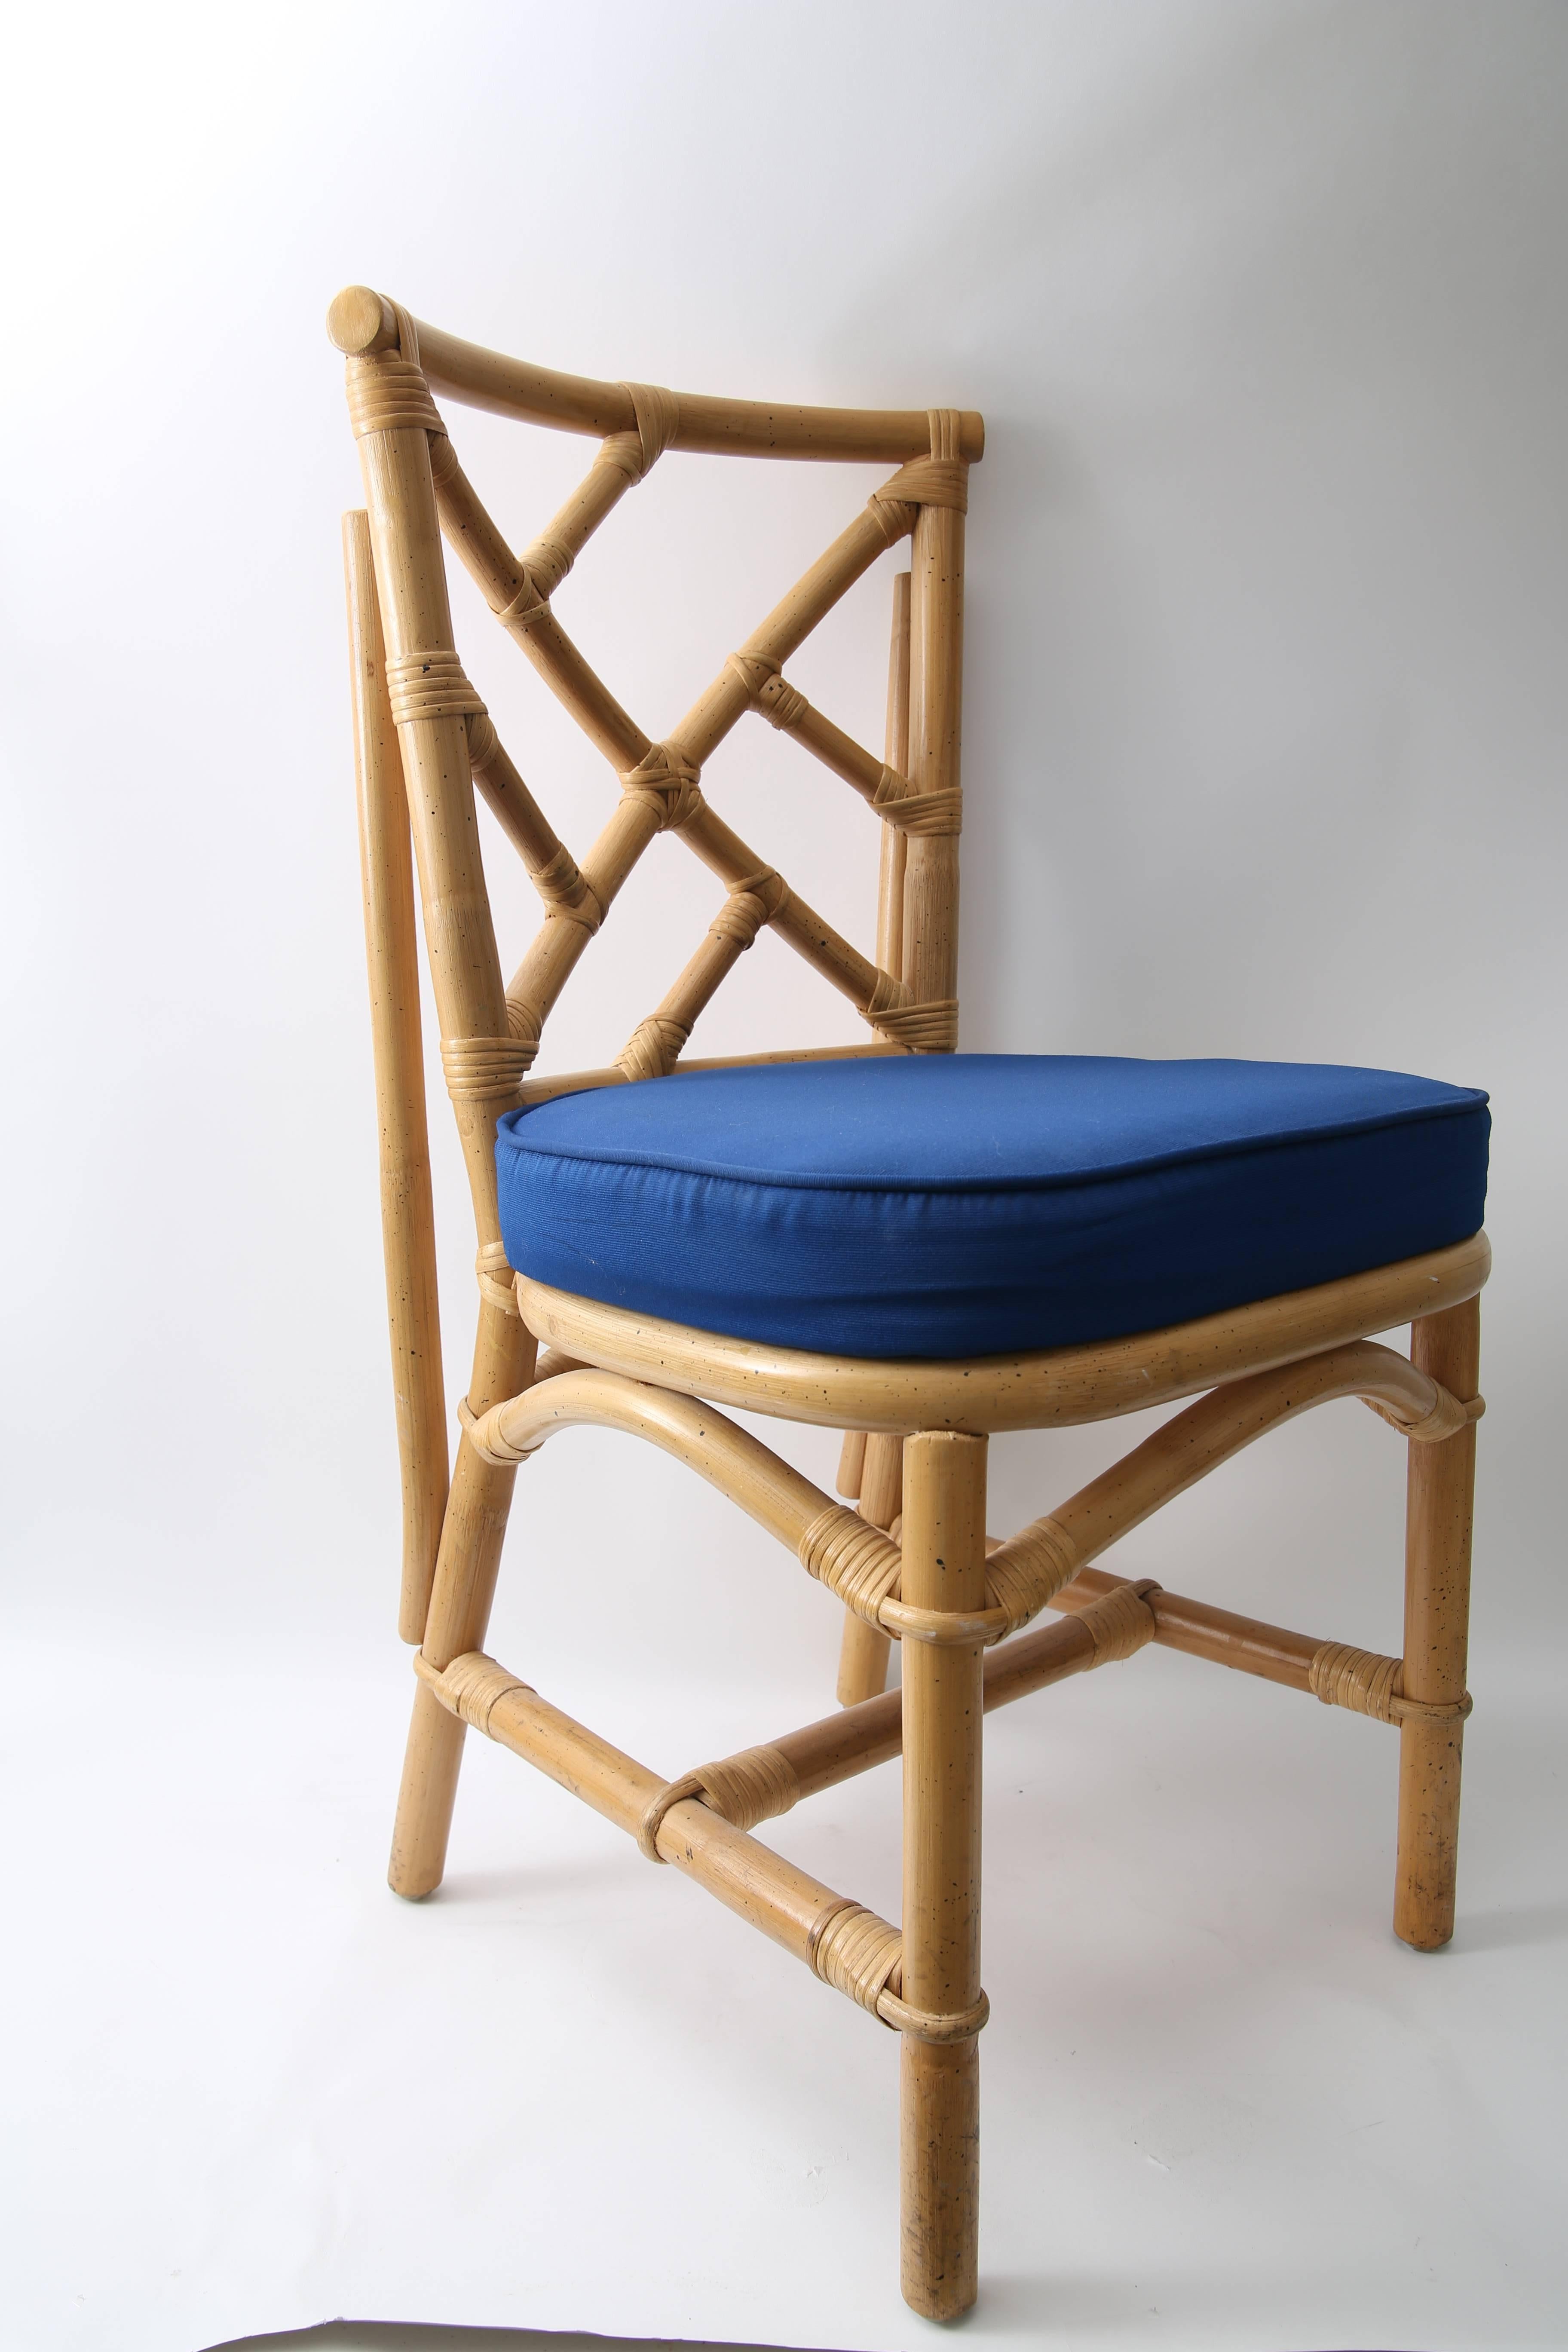 This stylish set of four side chairs are fabricated in bamboo with a fret-work Chippendale pattern and upholstered in a marine blue woven fabric.

Note: We also have the same chairs available in quantities of a ten piece or six piece set.